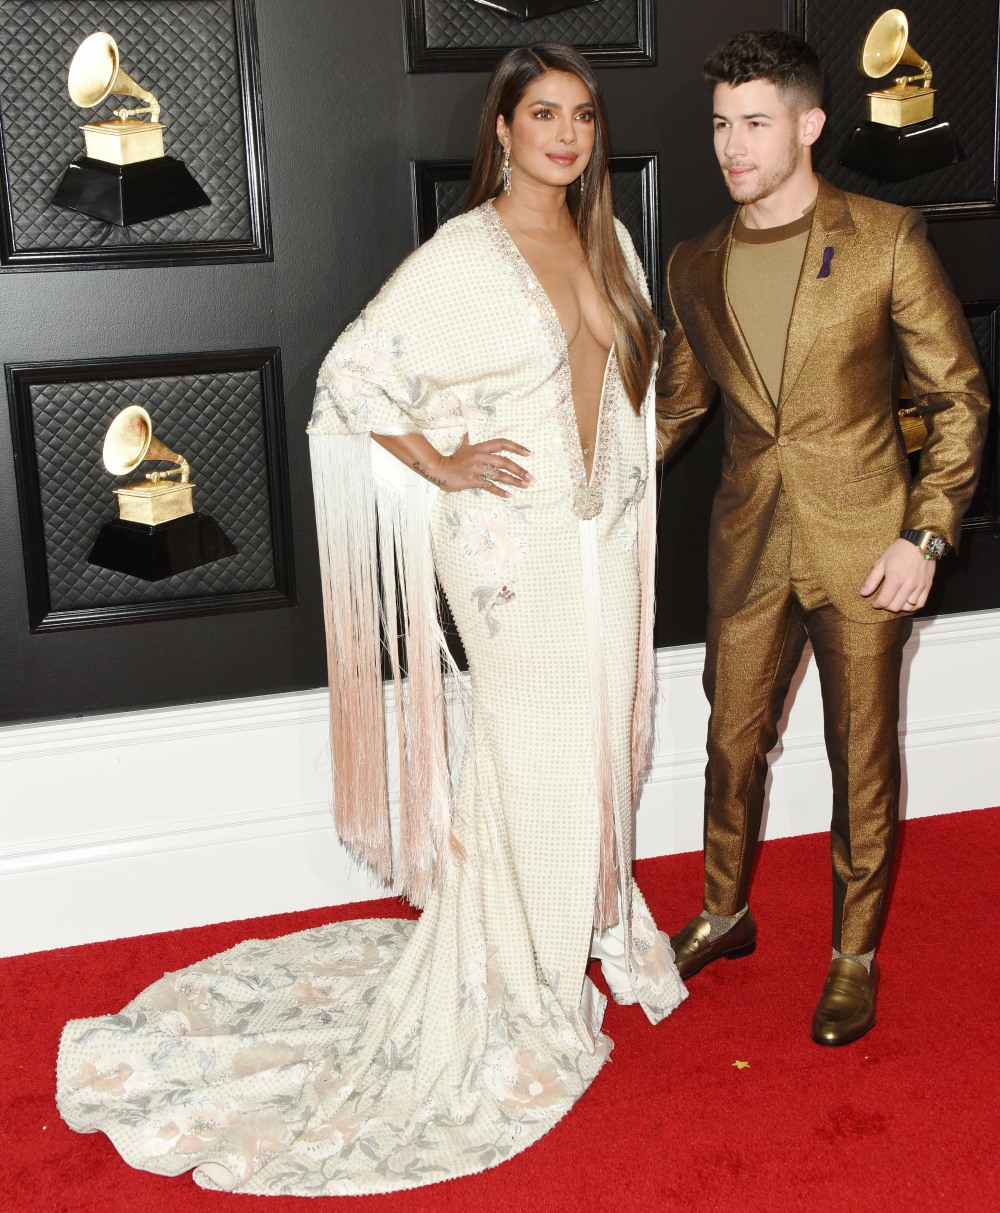 Priyanka Chopra, Nick Jonas arrives at the 62nd Annual GRAMMY Awards at Staples Center on January 26, 2020 in Los Angeles, California